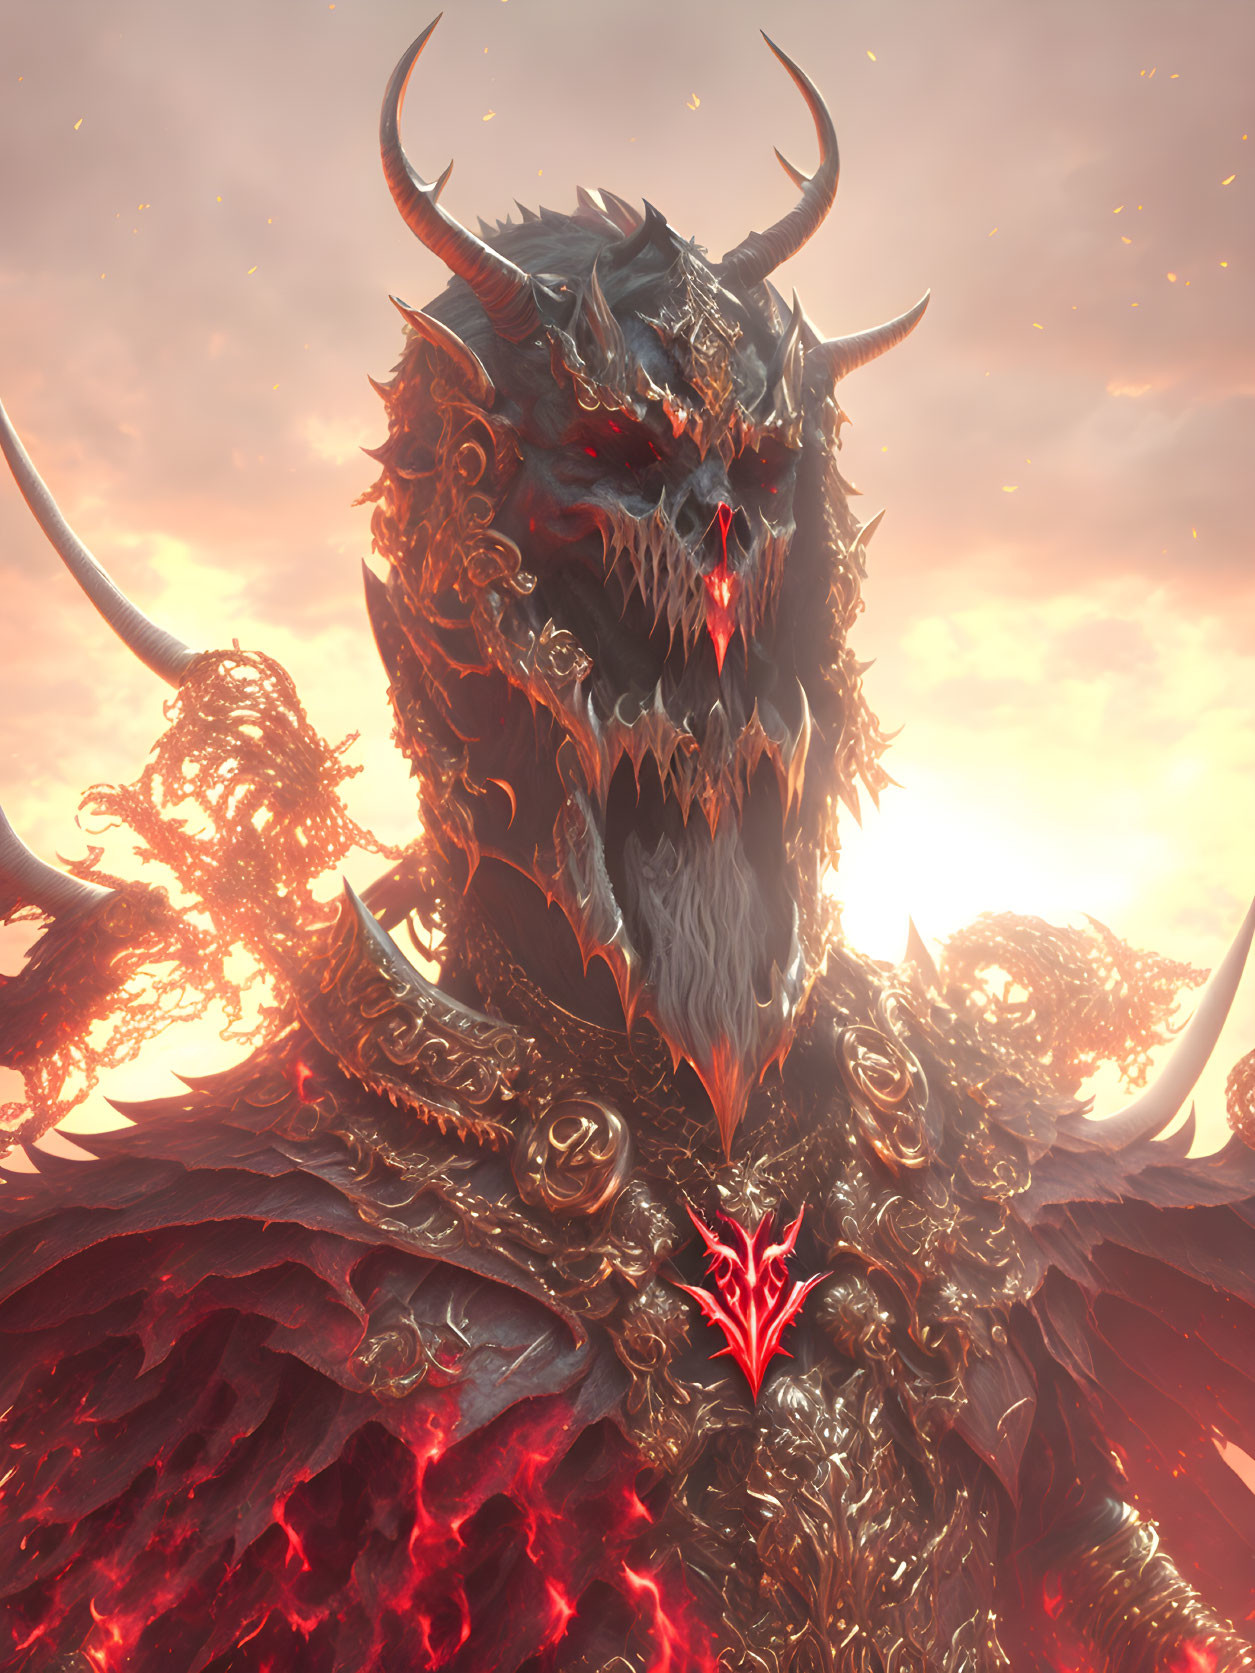 Majestic fantasy creature with horns and red eyes in fiery armor landscape